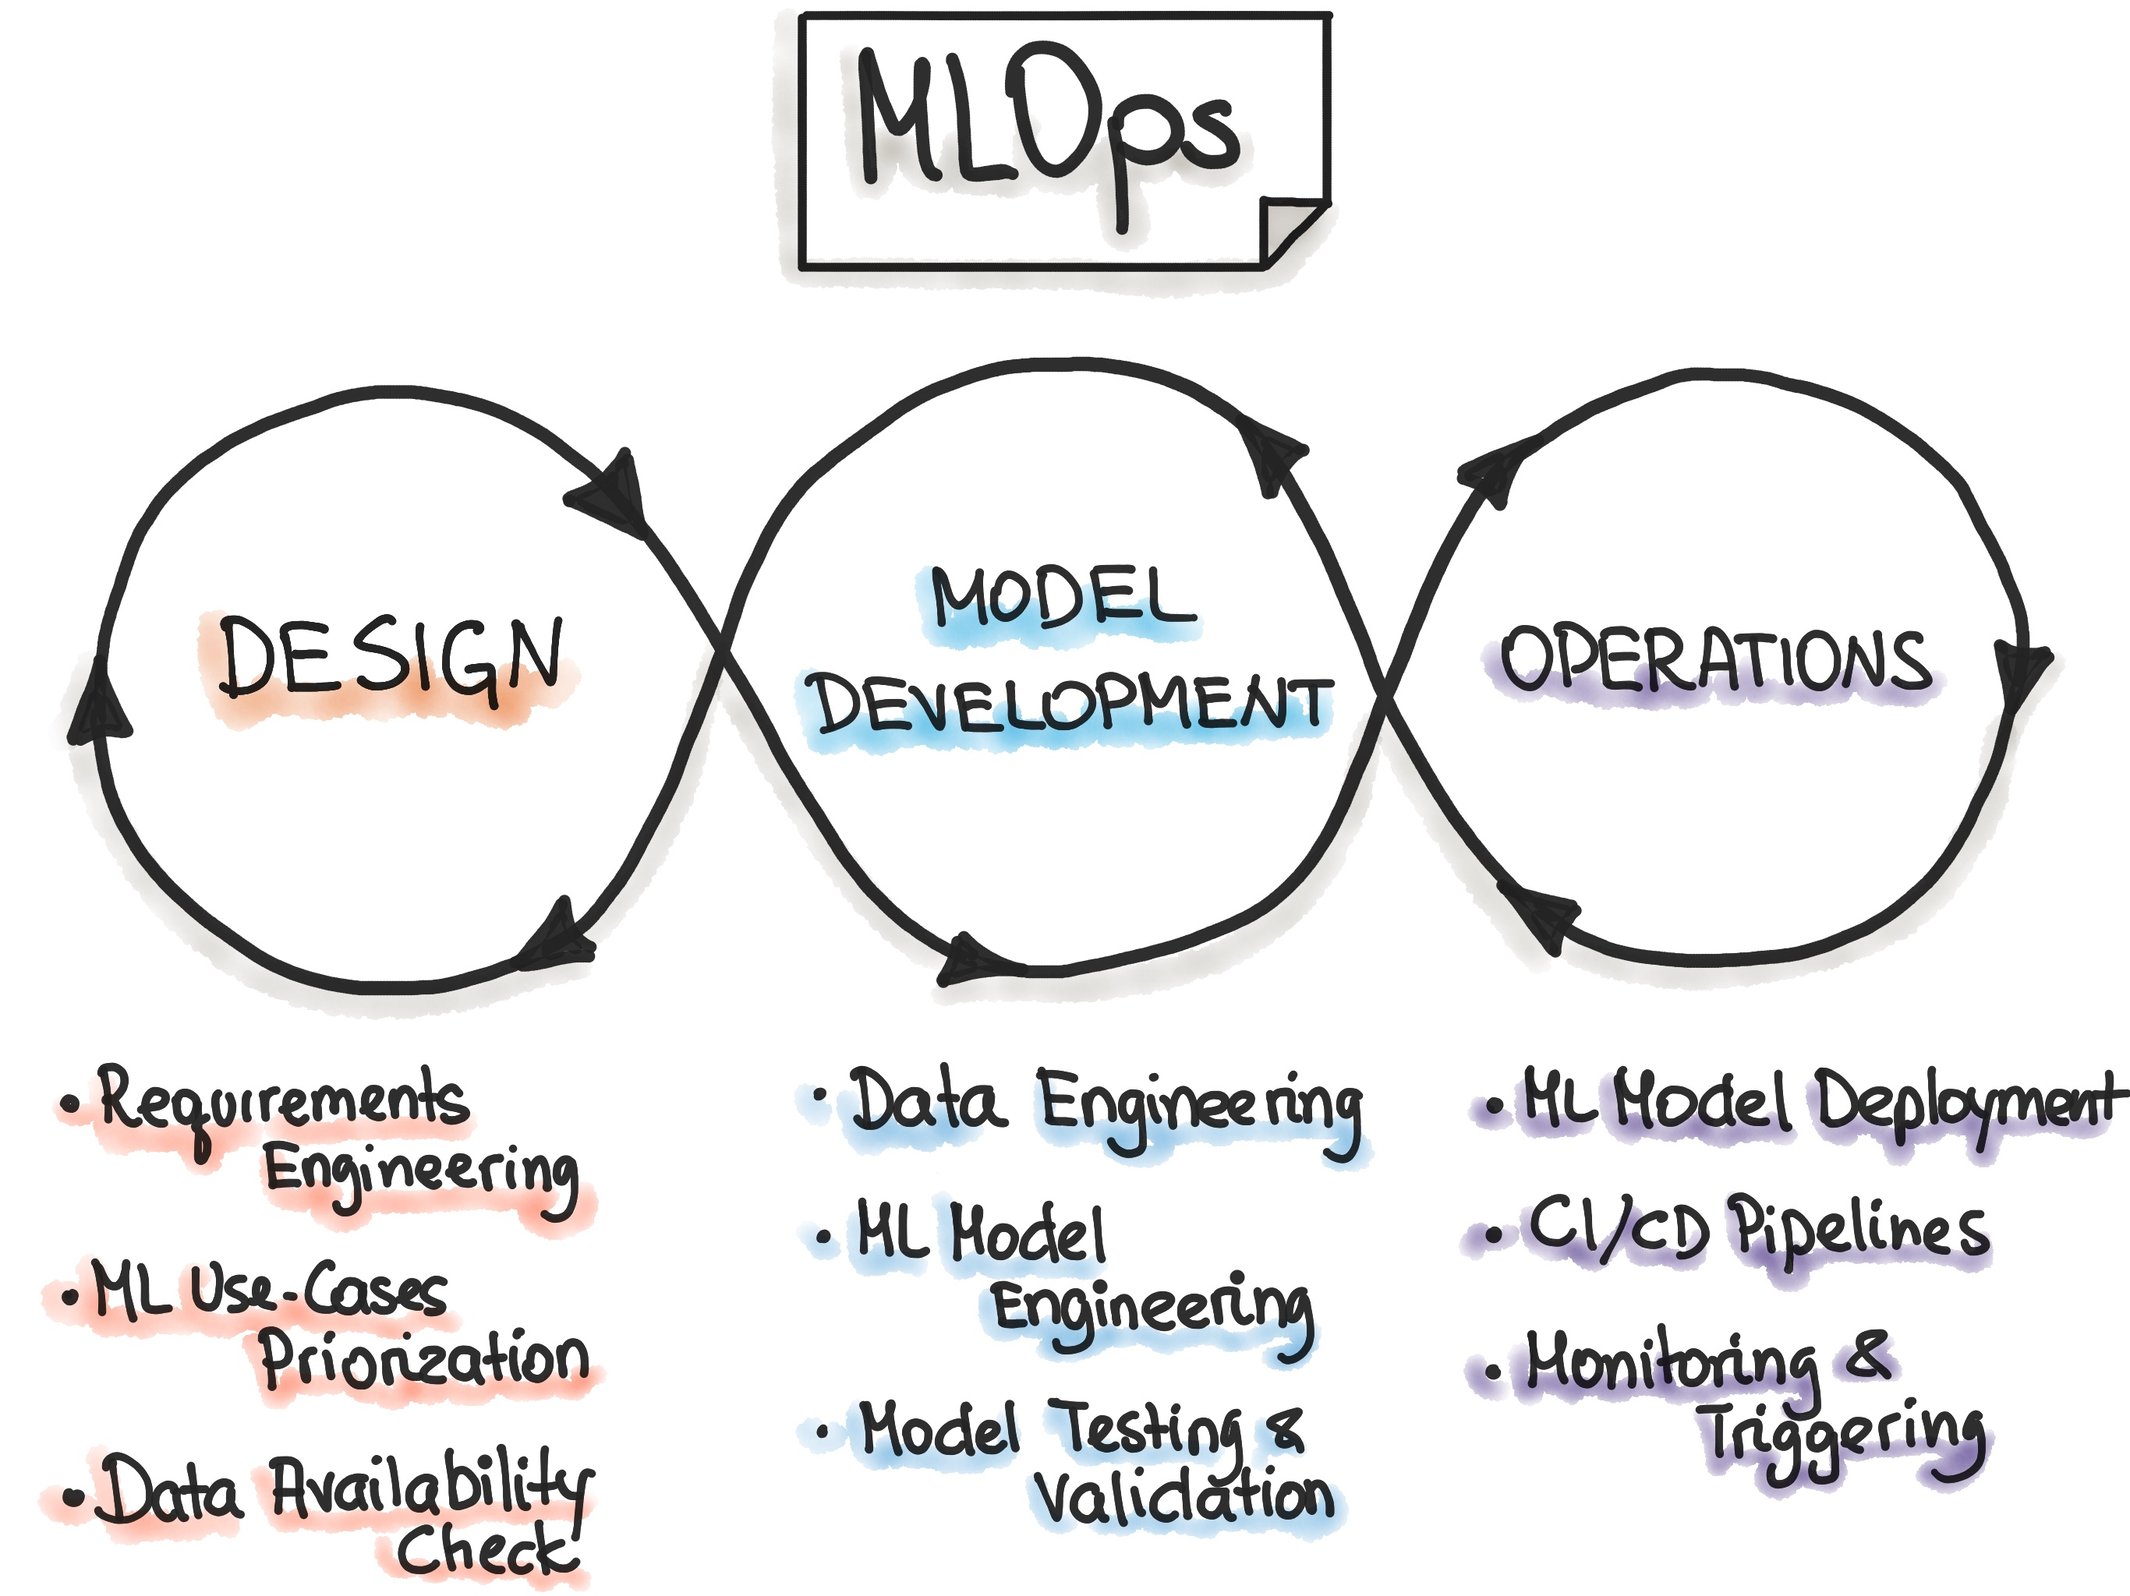 A hand-drawn illustration showing the interaction of design, model development, and operations as part of MLOps.